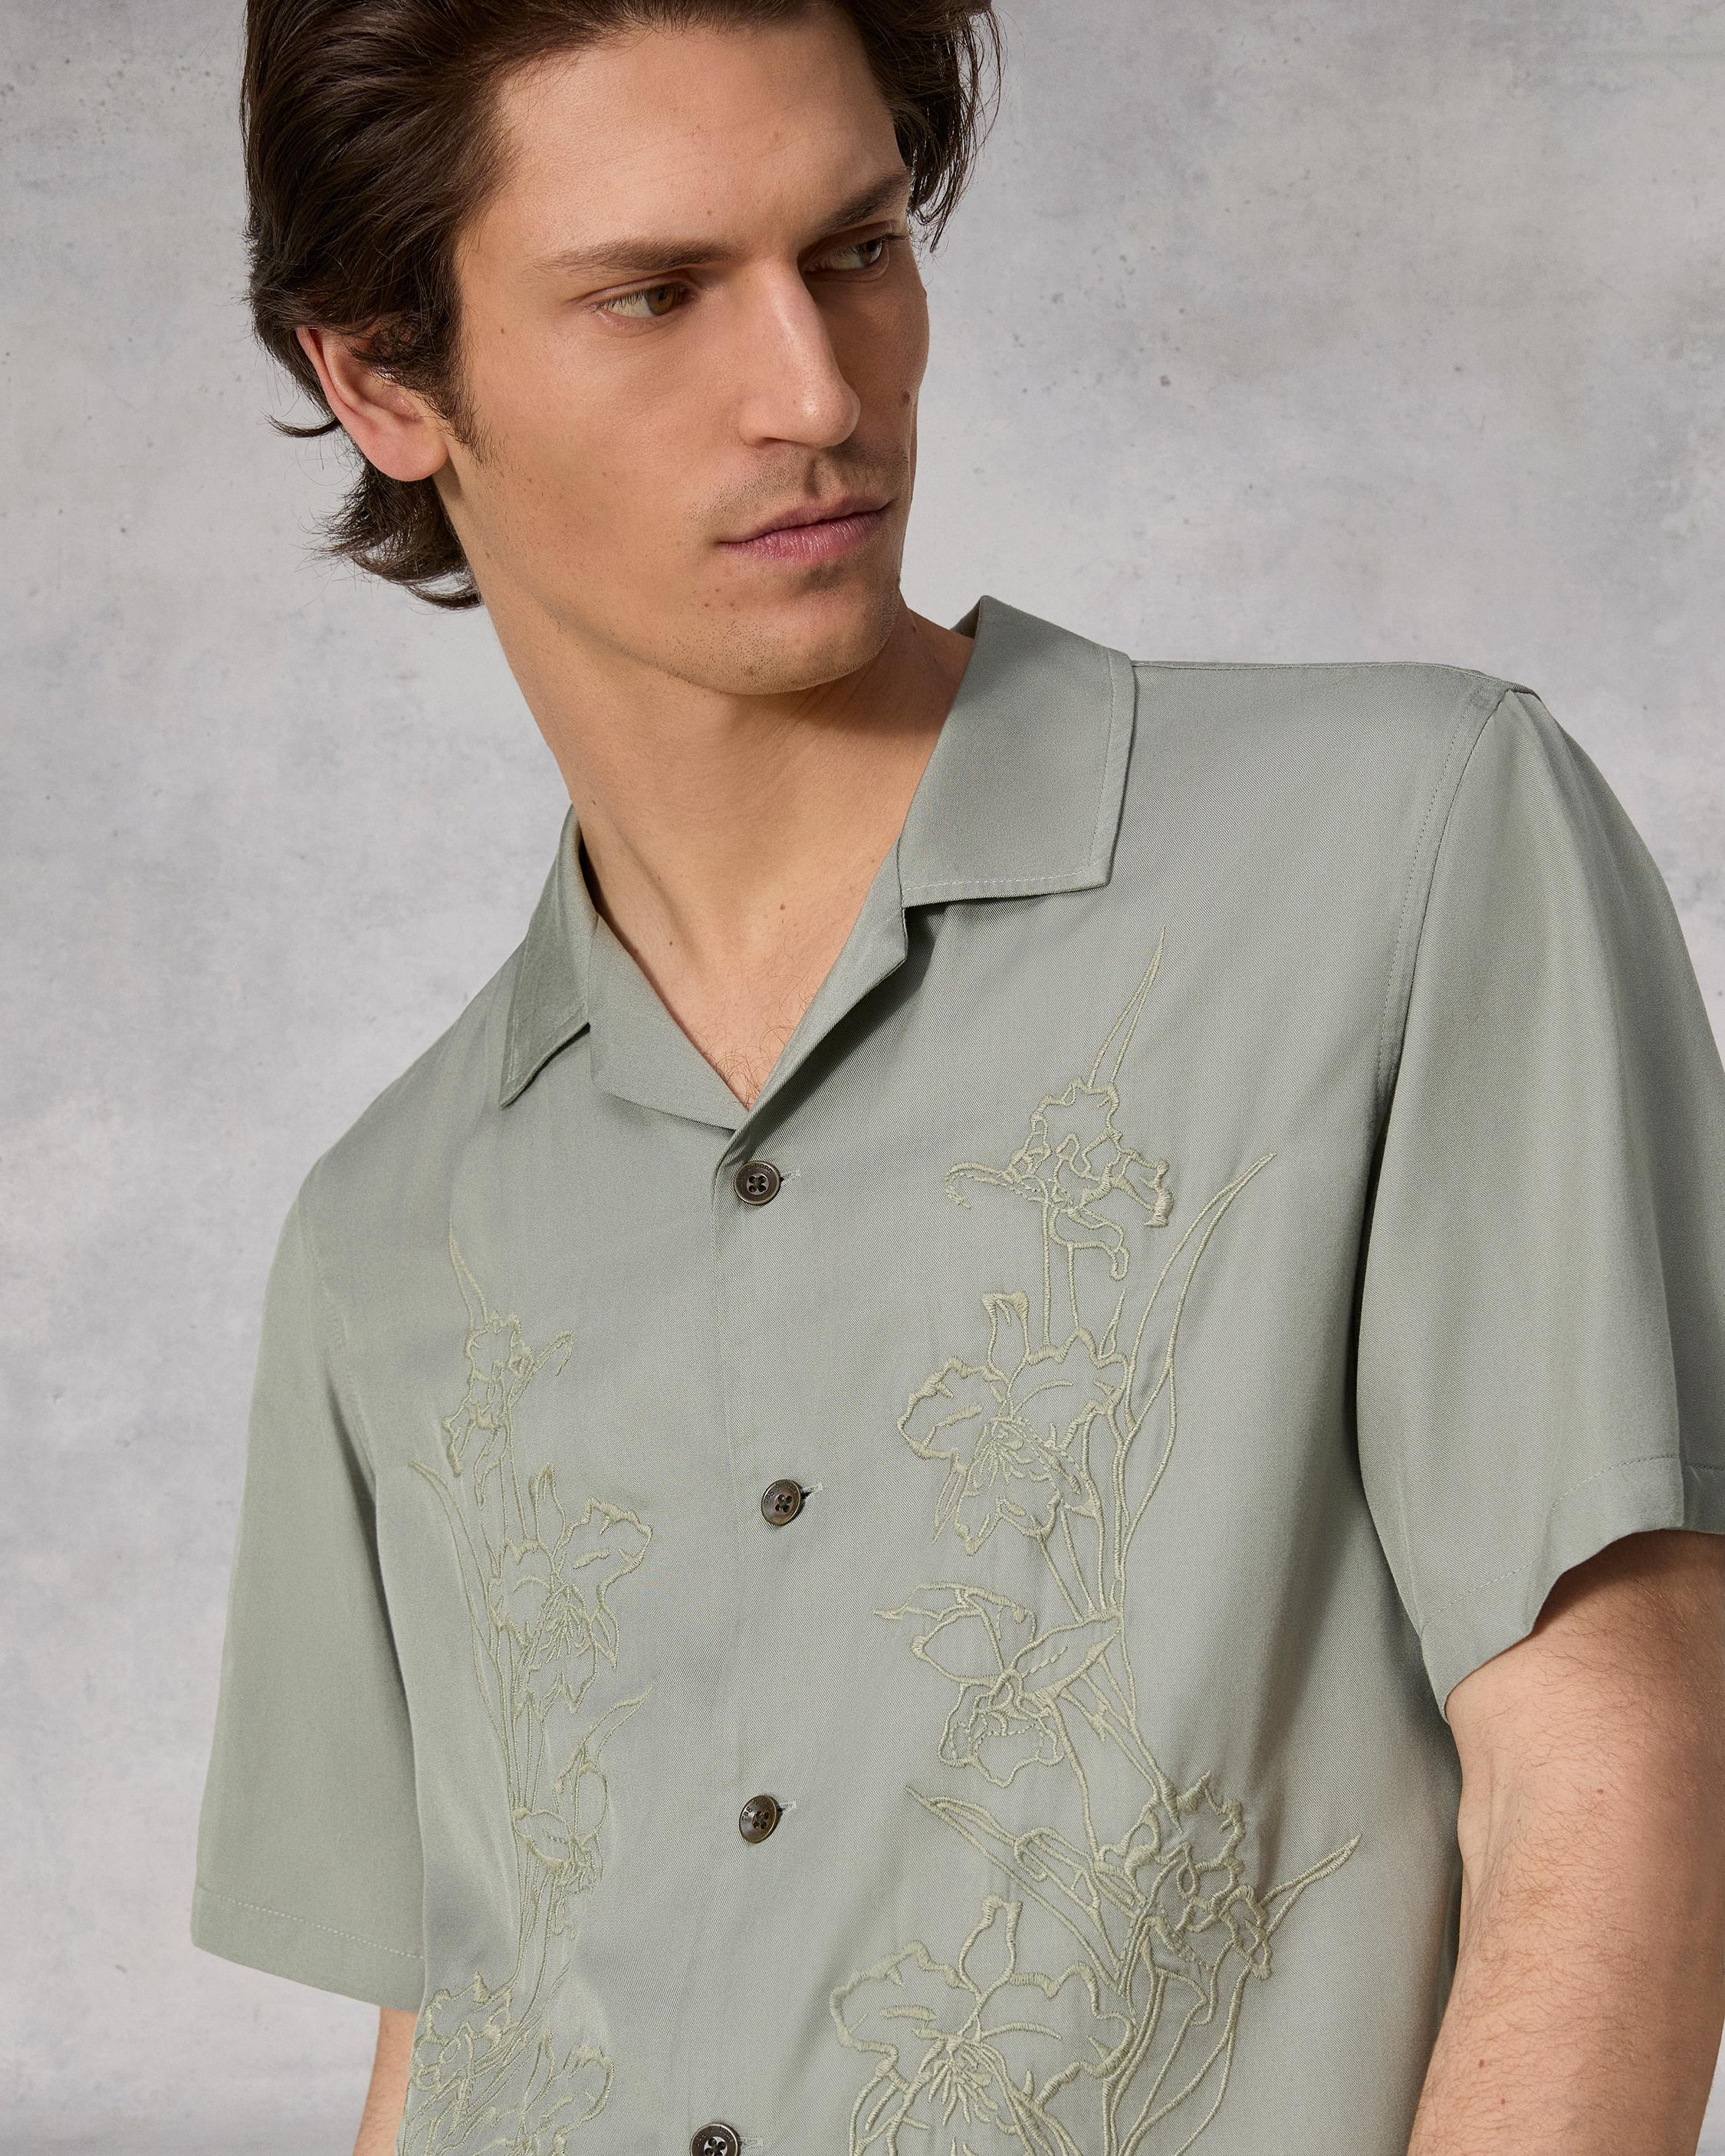 Avery Resort Embroidered Shirt
Relaxed Fit Button Down - 6